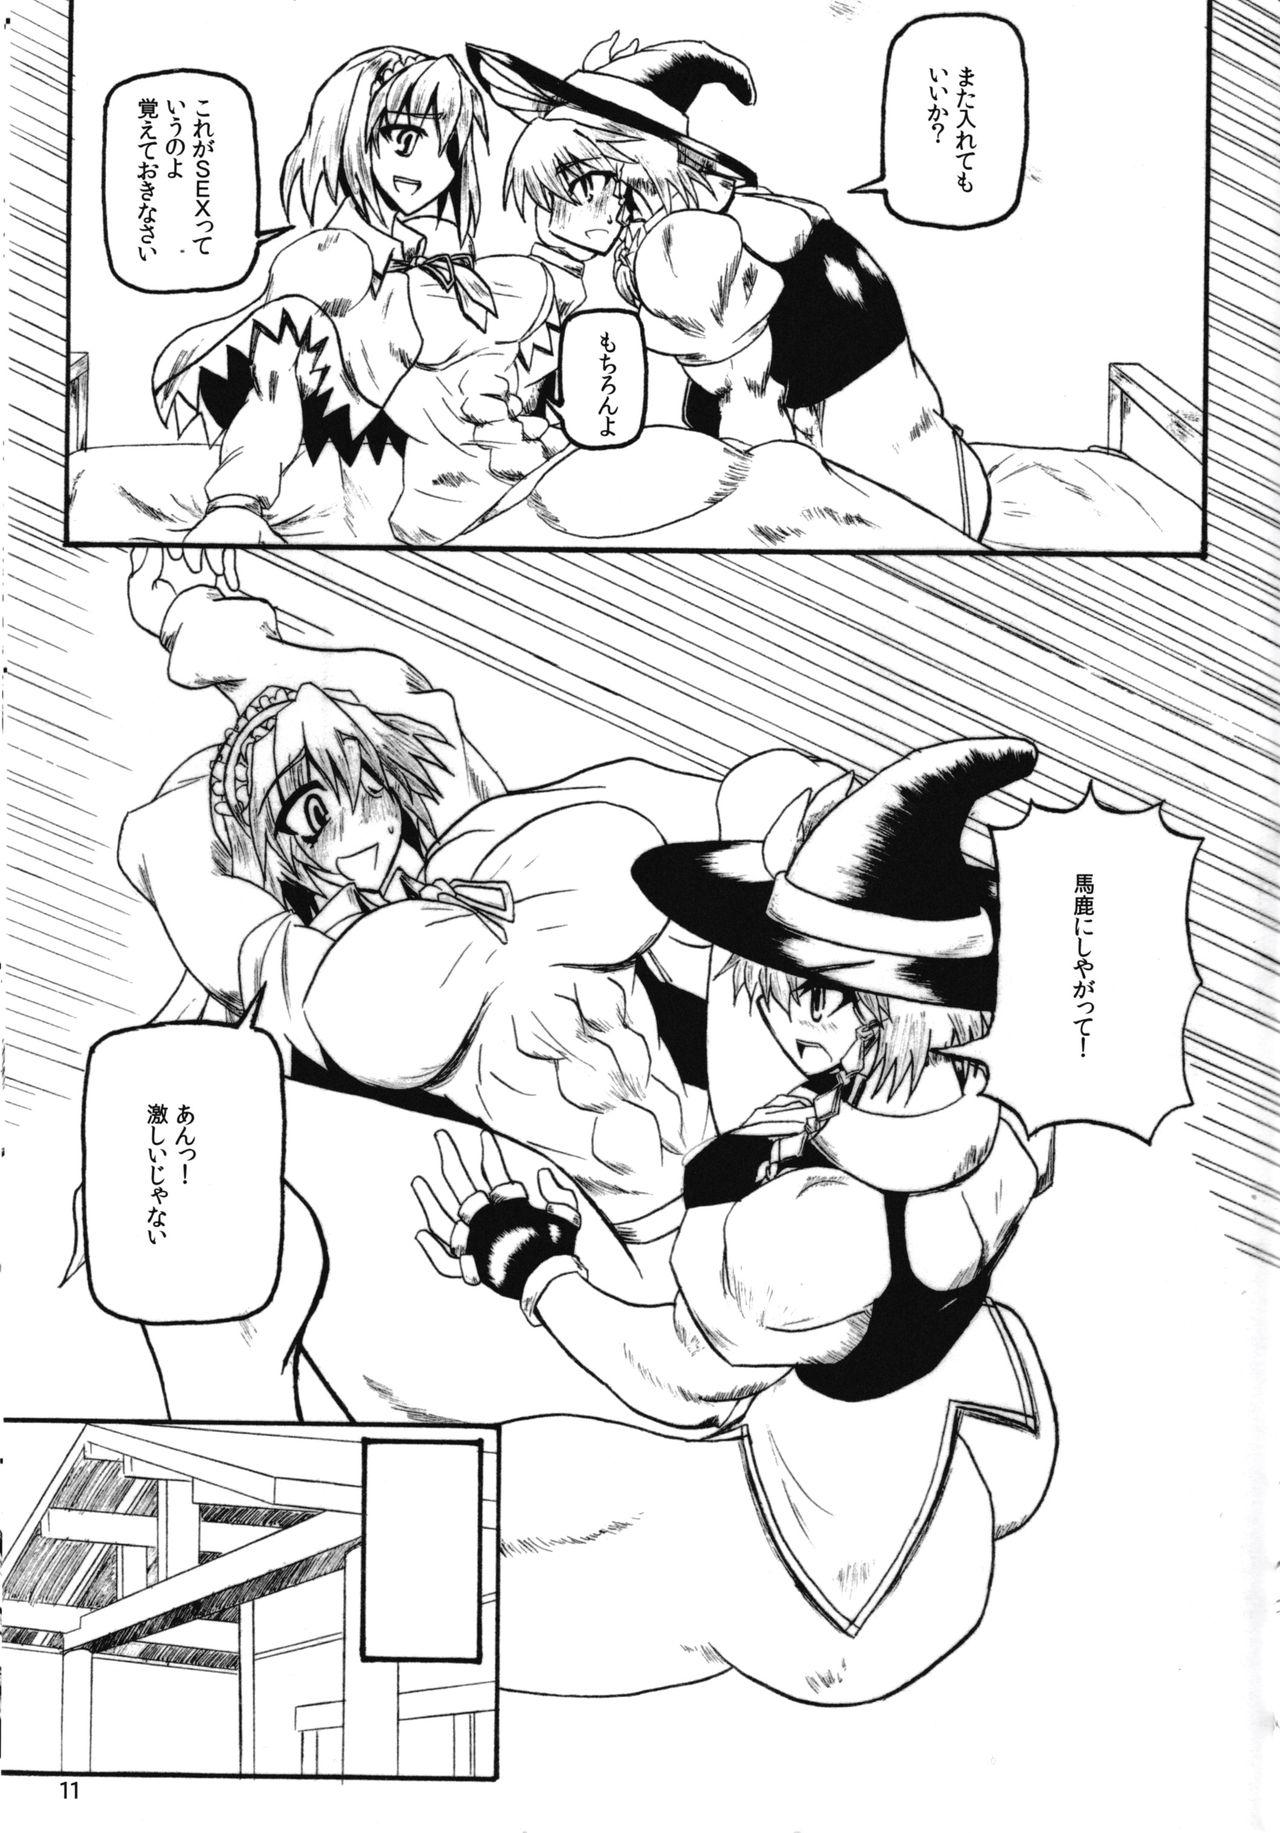 Teenage Sex Exceeds Power of Human2 - Touhou project Busty - Page 11